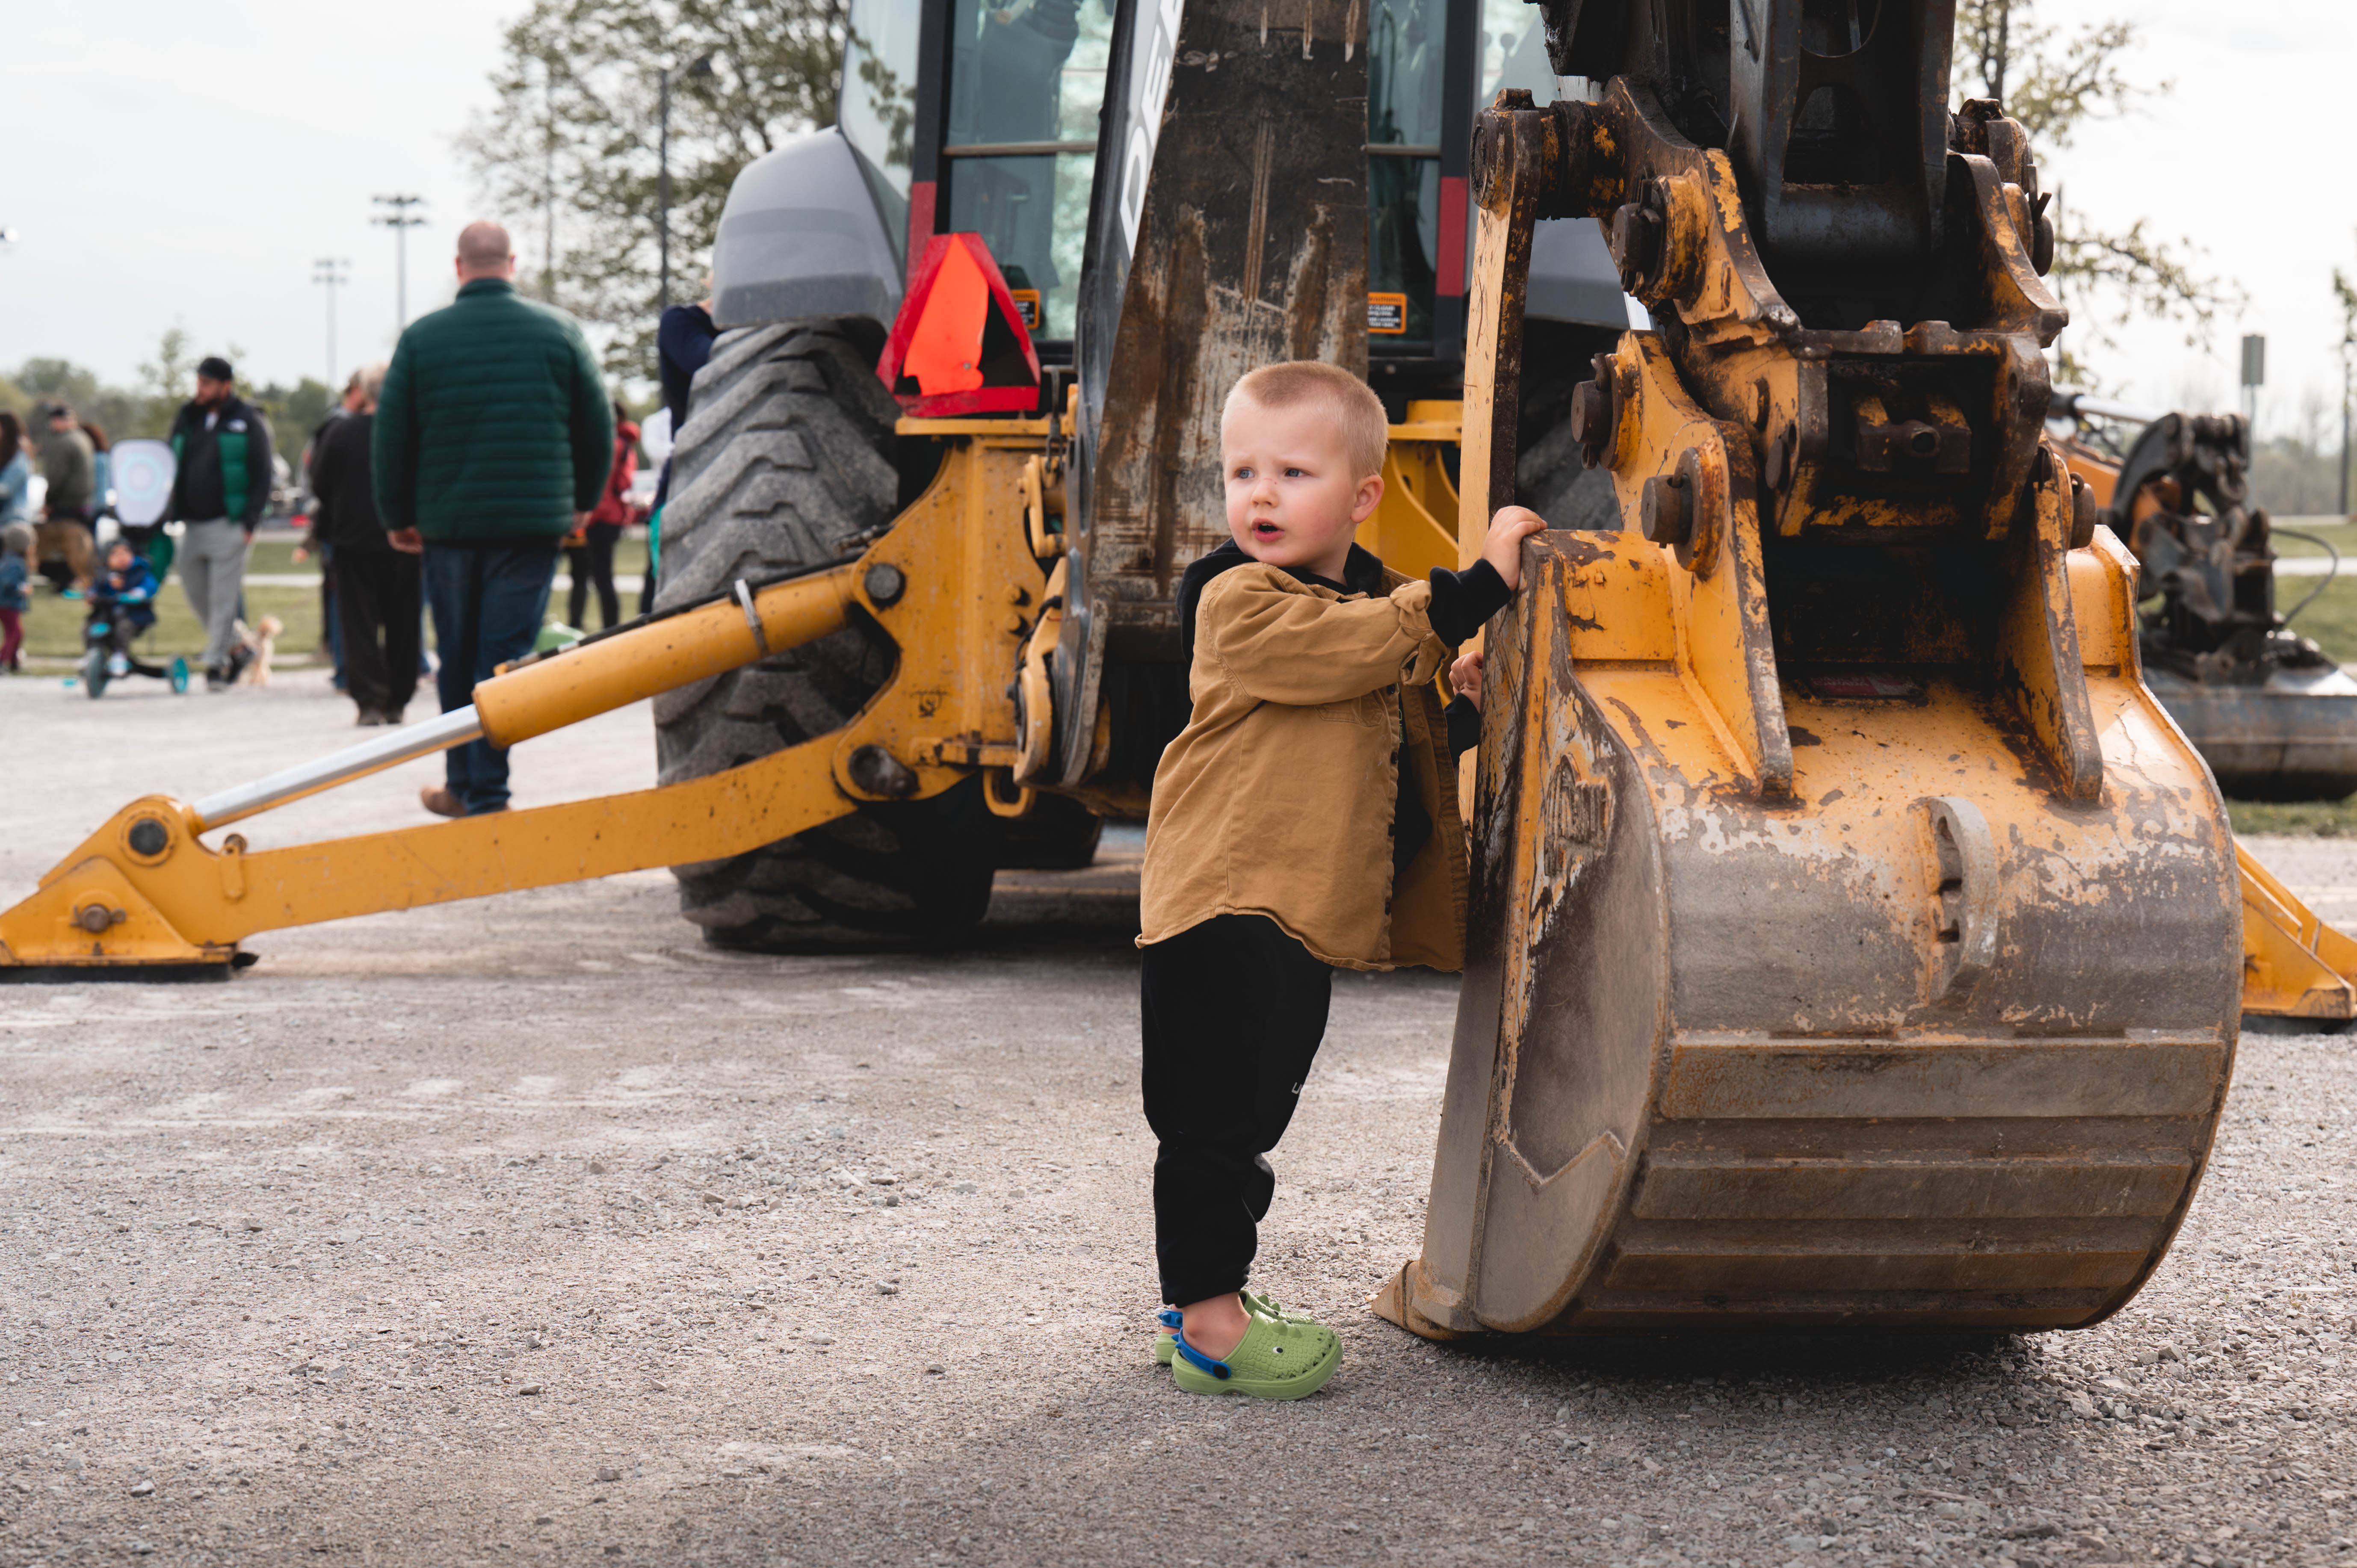 Image from Touch a Truck Community Event